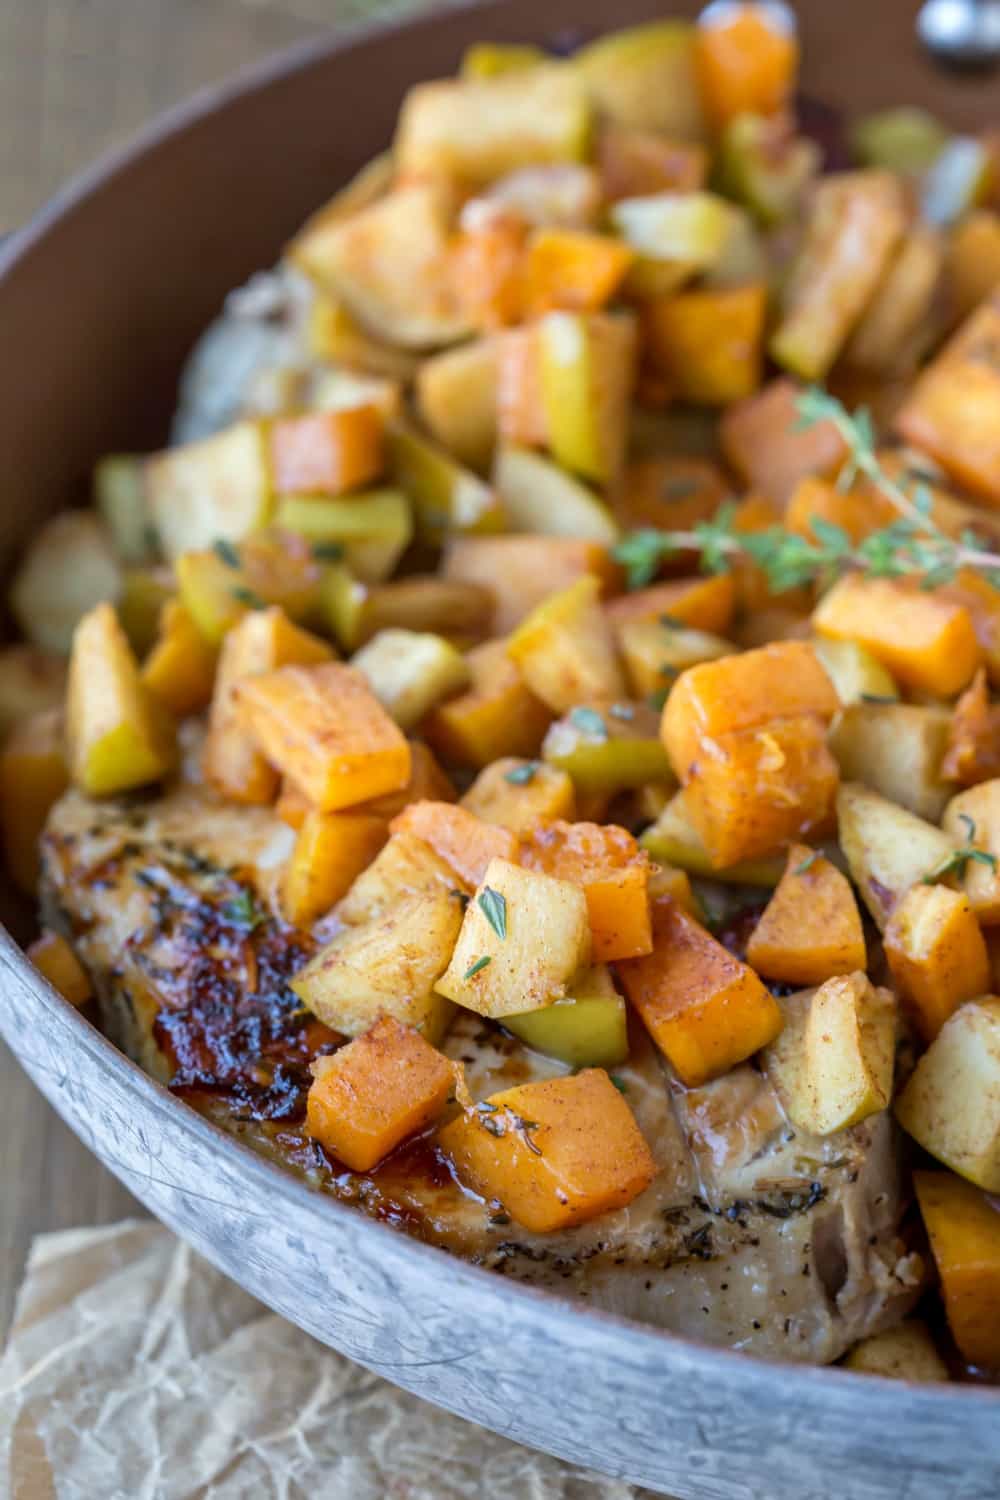 Pork Chops with Cinnamon Apples and Butternut Squash in a skillet on brown parchment paper